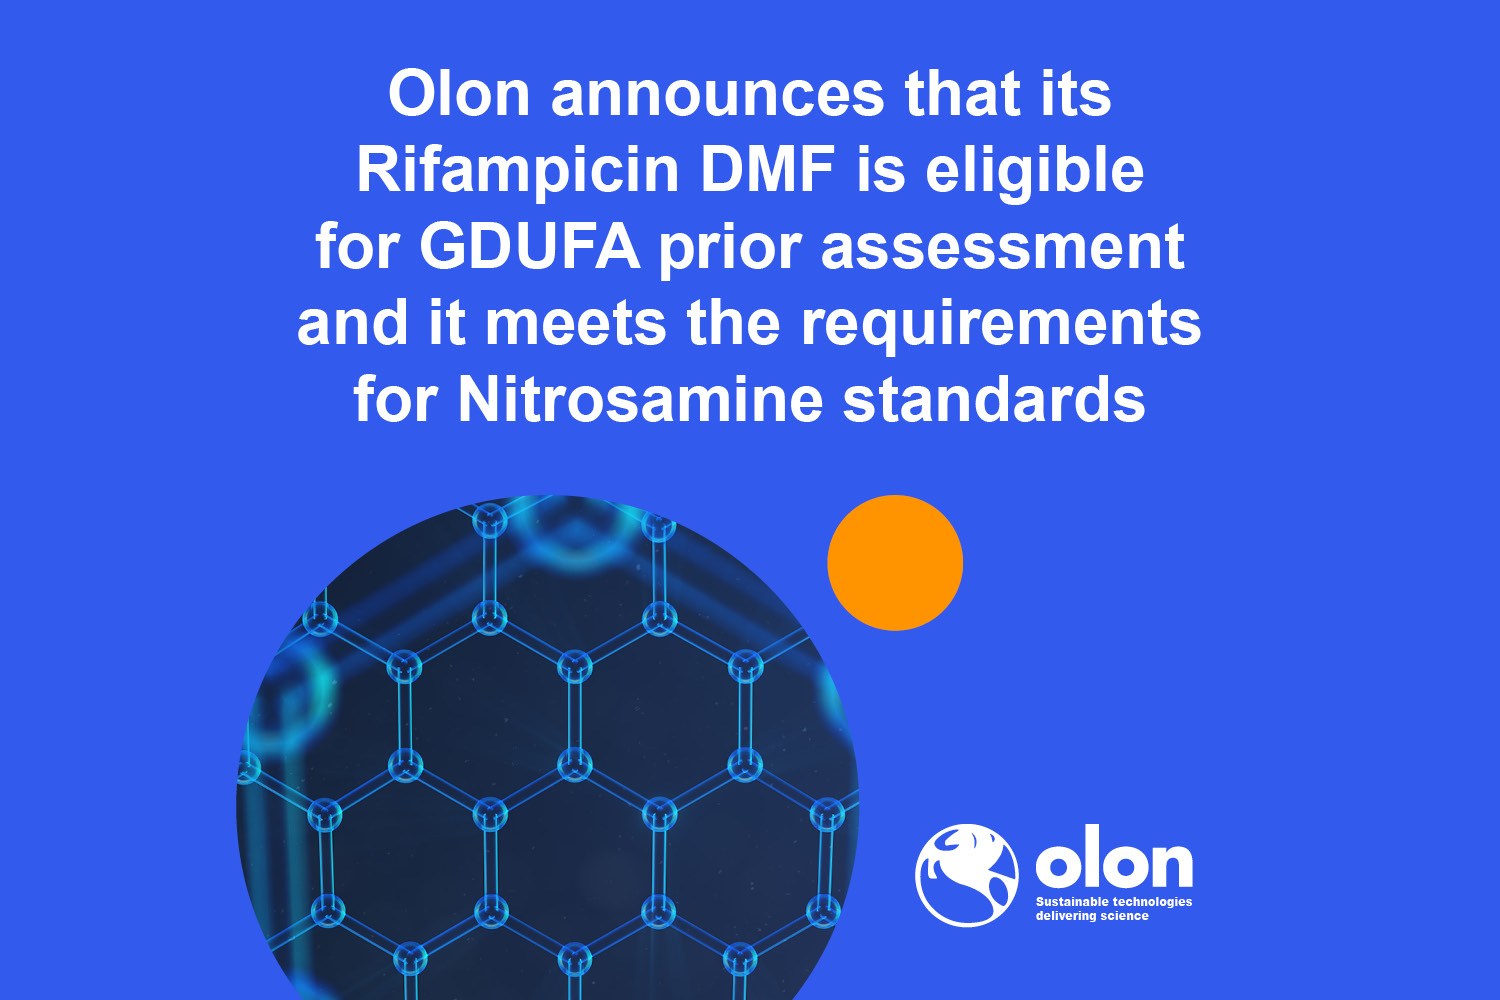 OLON ANNOUNCES THAT ITS RIFAMPICIN DMF IS ELIGIBLE FOR GDUFA PRIOR ASSESSMENT AND IT MEETS THE REQUIREMENTS FOR NITROSAMINE STANDARDS